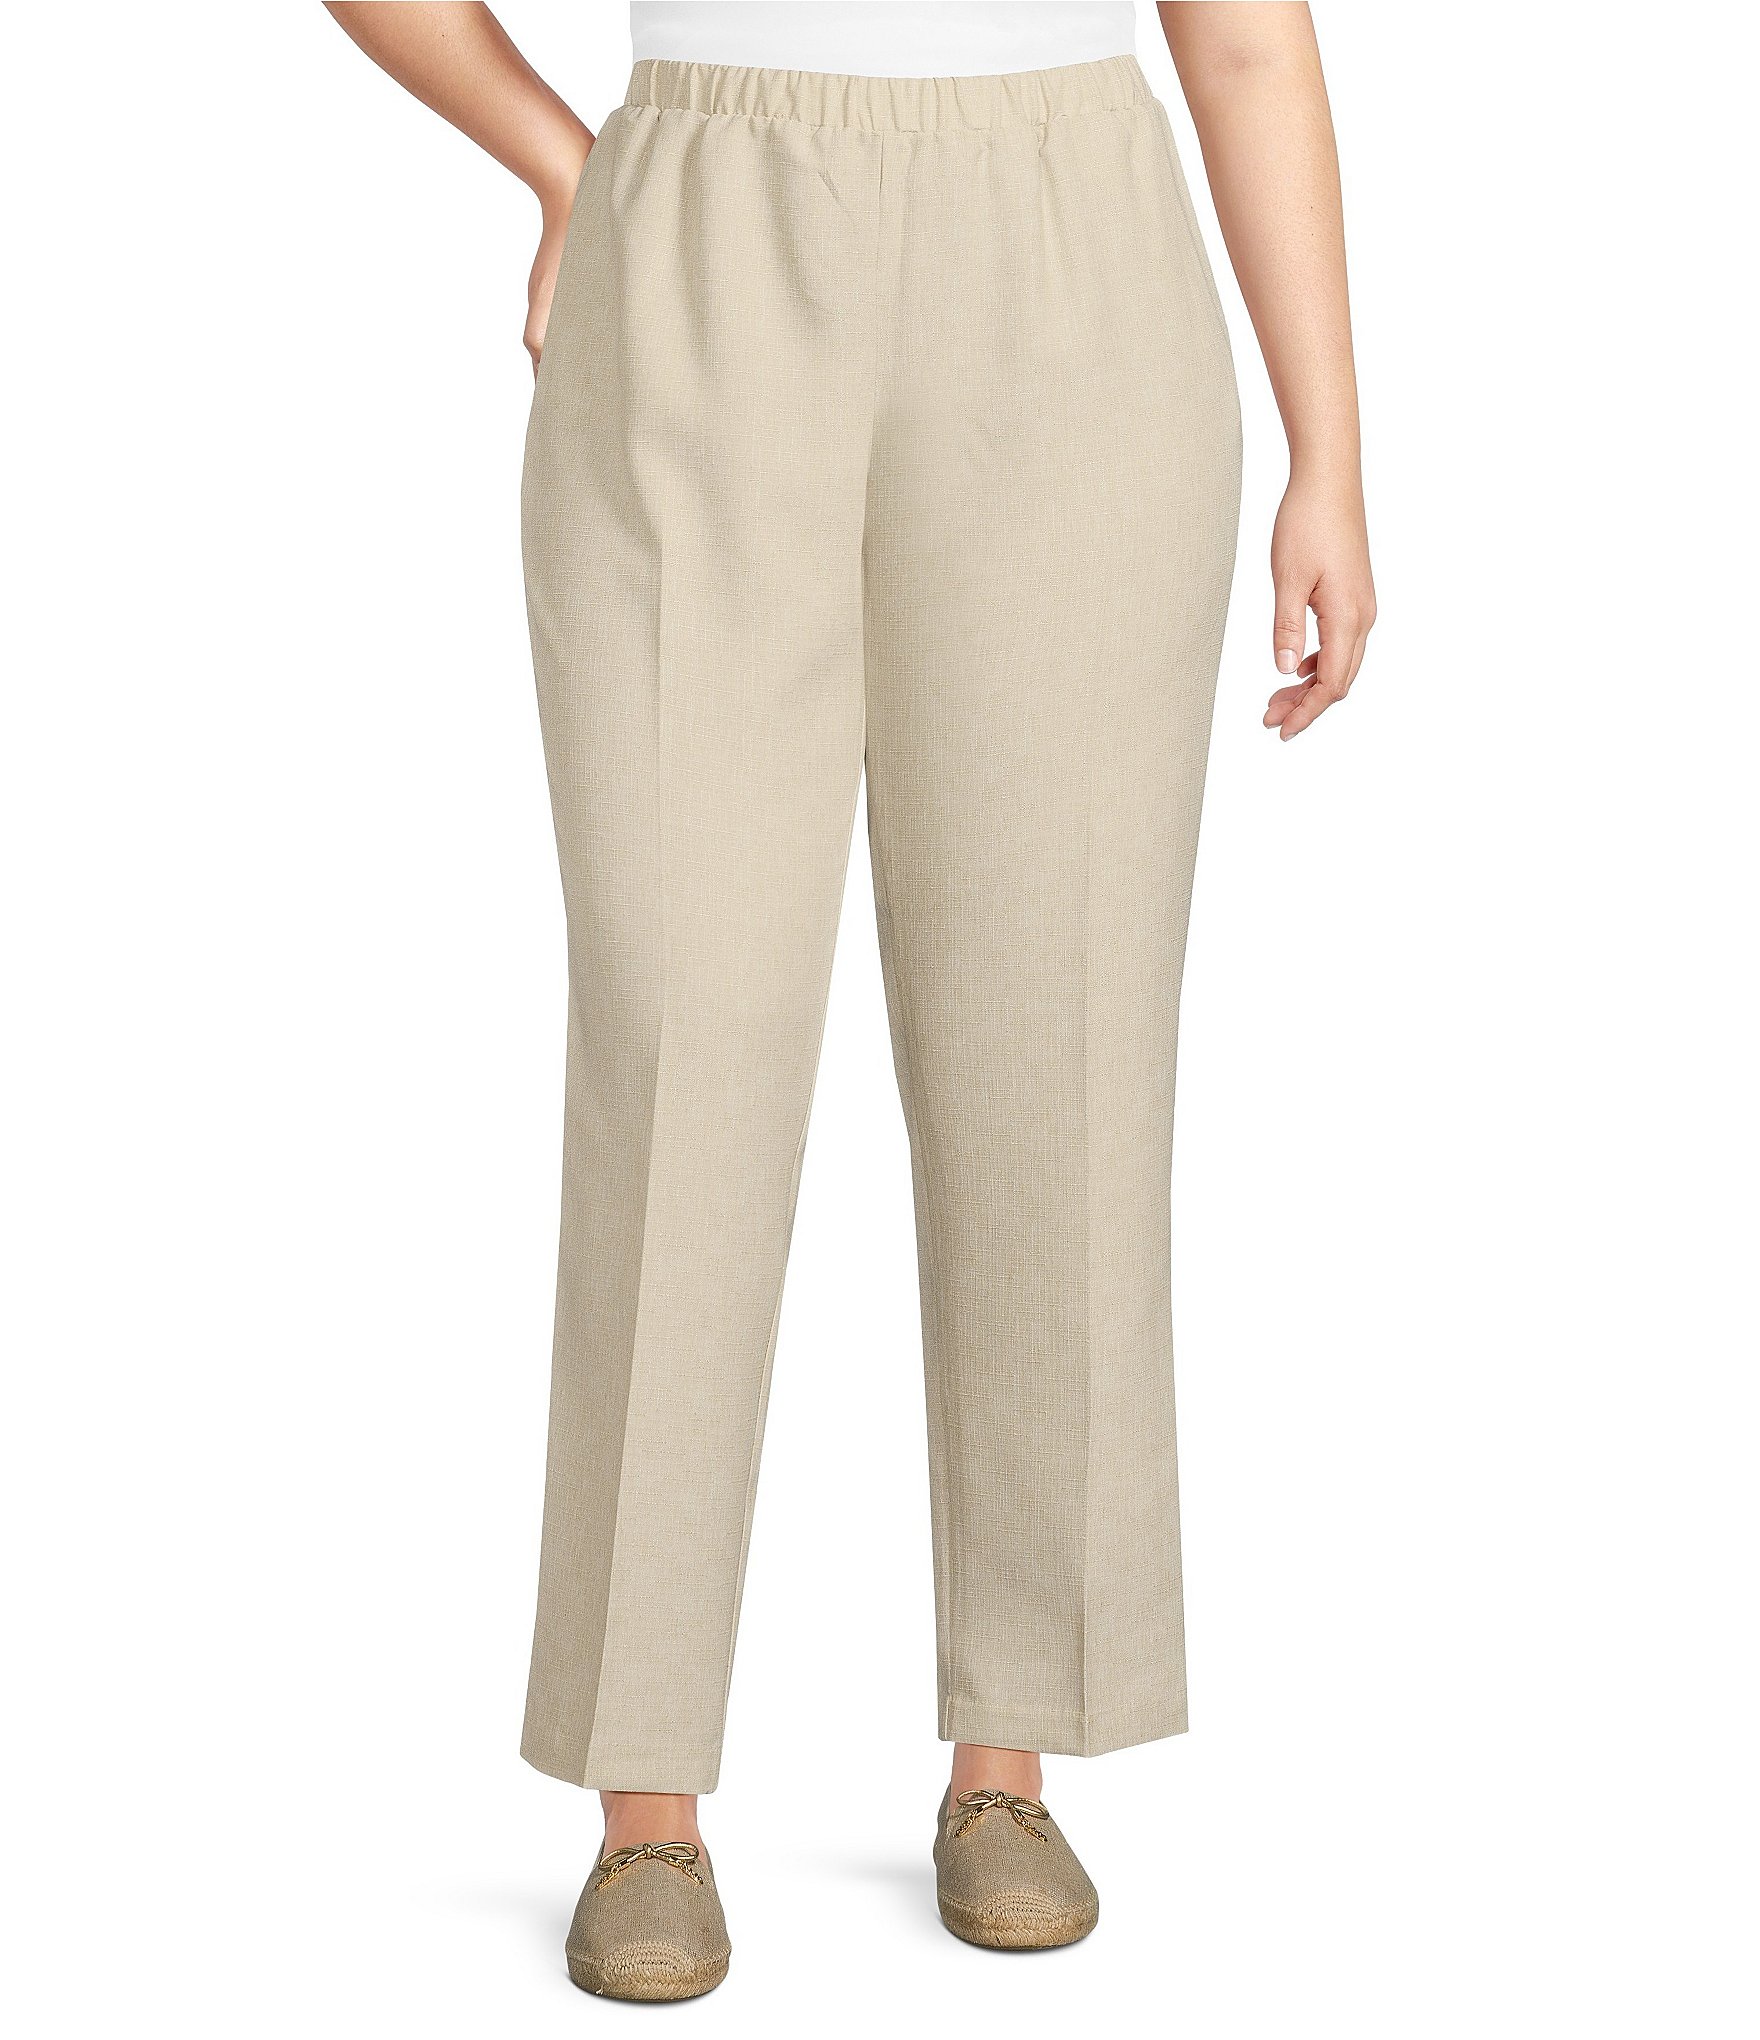 Allison Daley City Stretch Elastic Waist Straight Leg Pocketed Pull-On Pants